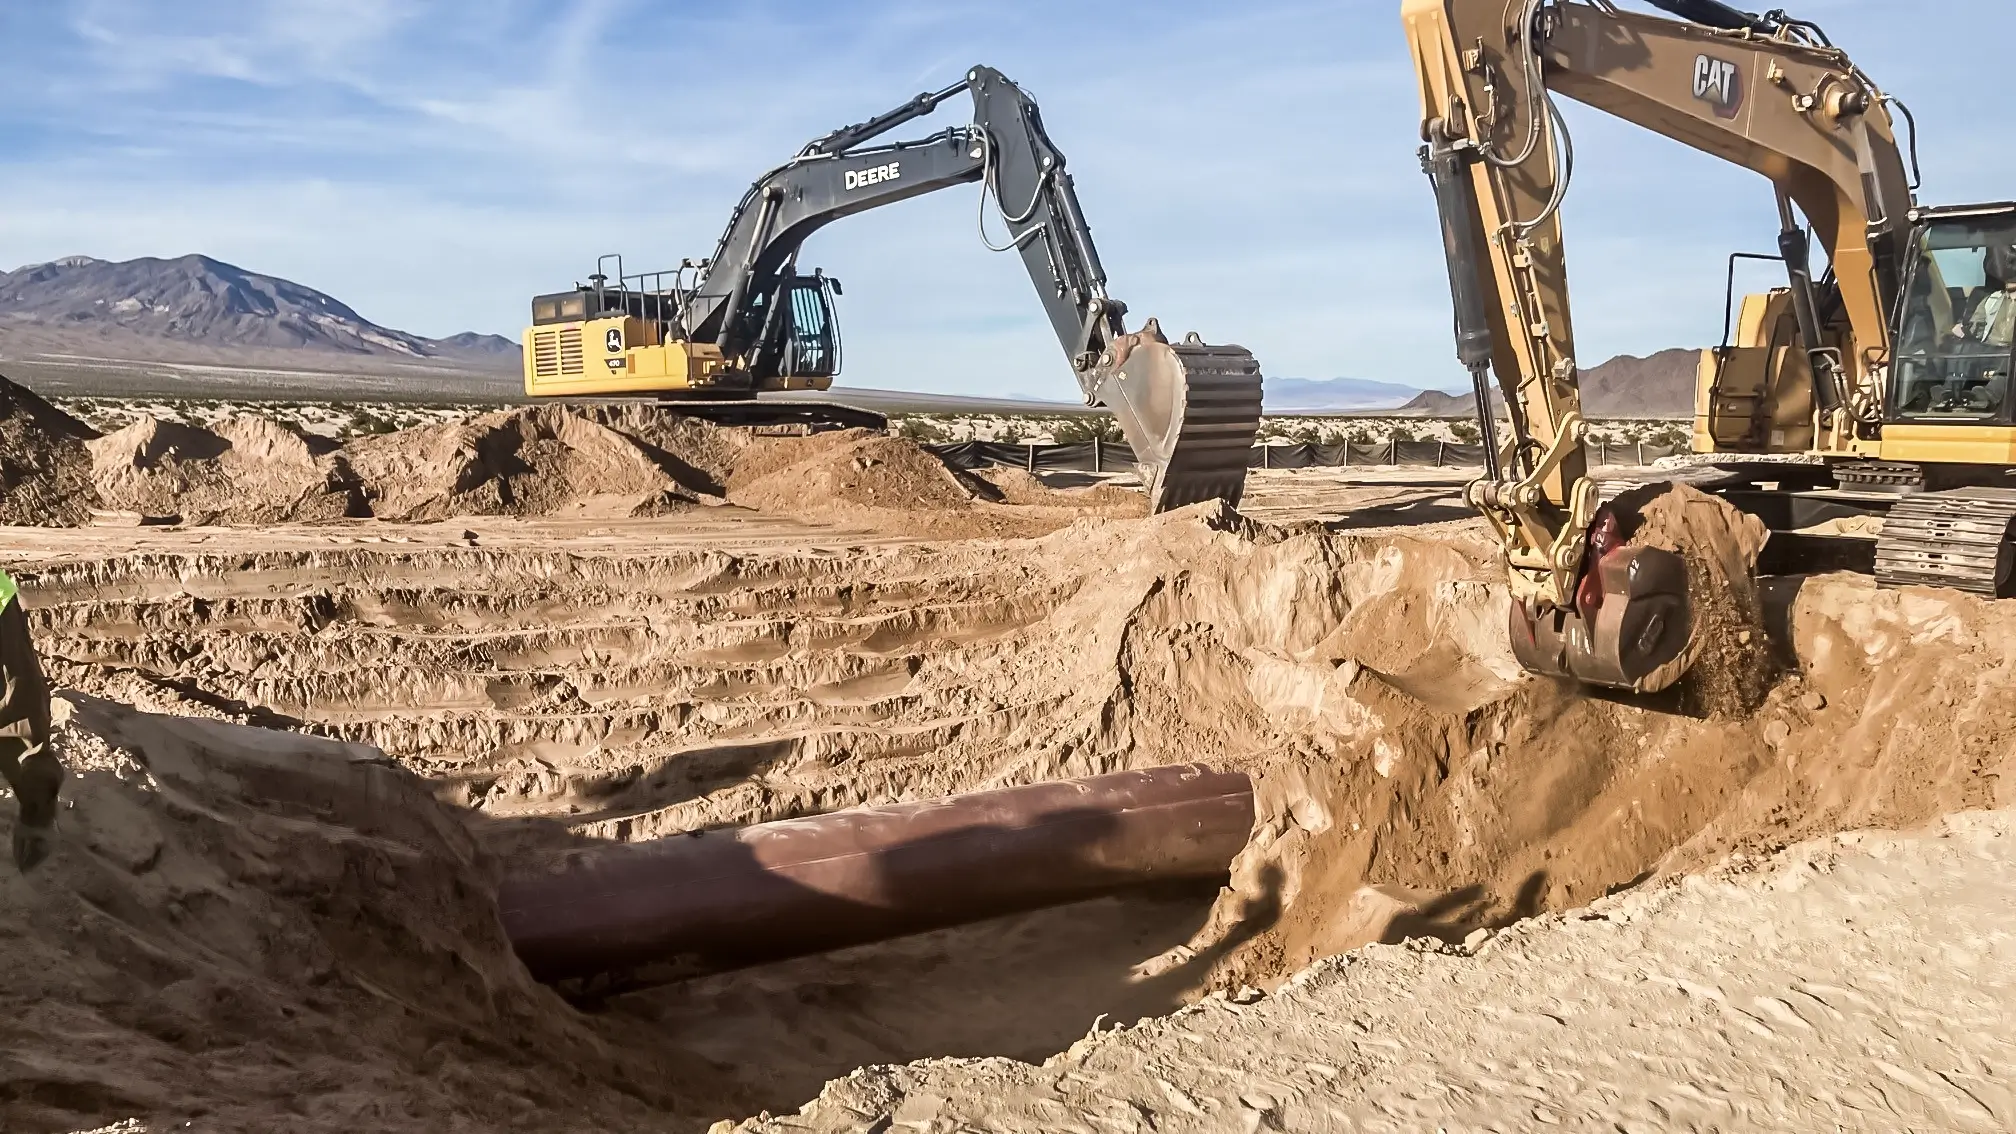 Several excavators dig out an old pipeline in a desert area.